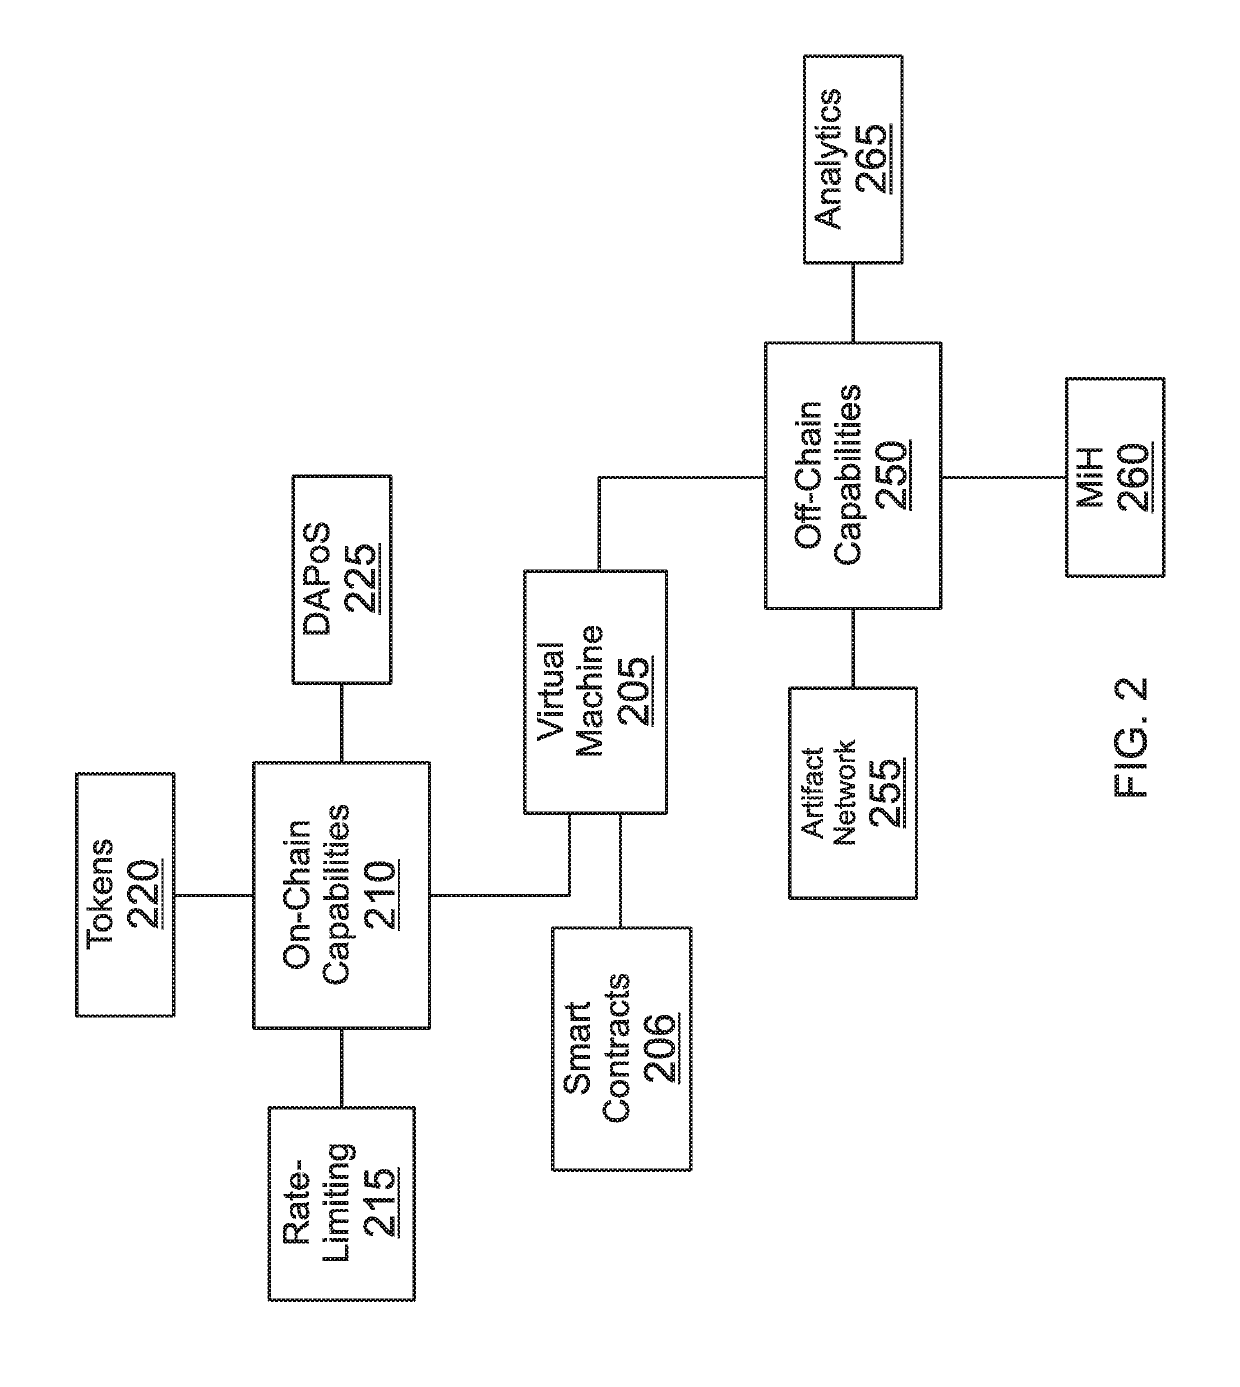 System and Method for a Blockchain-Supported Programmable Information Management and Data Distribution System